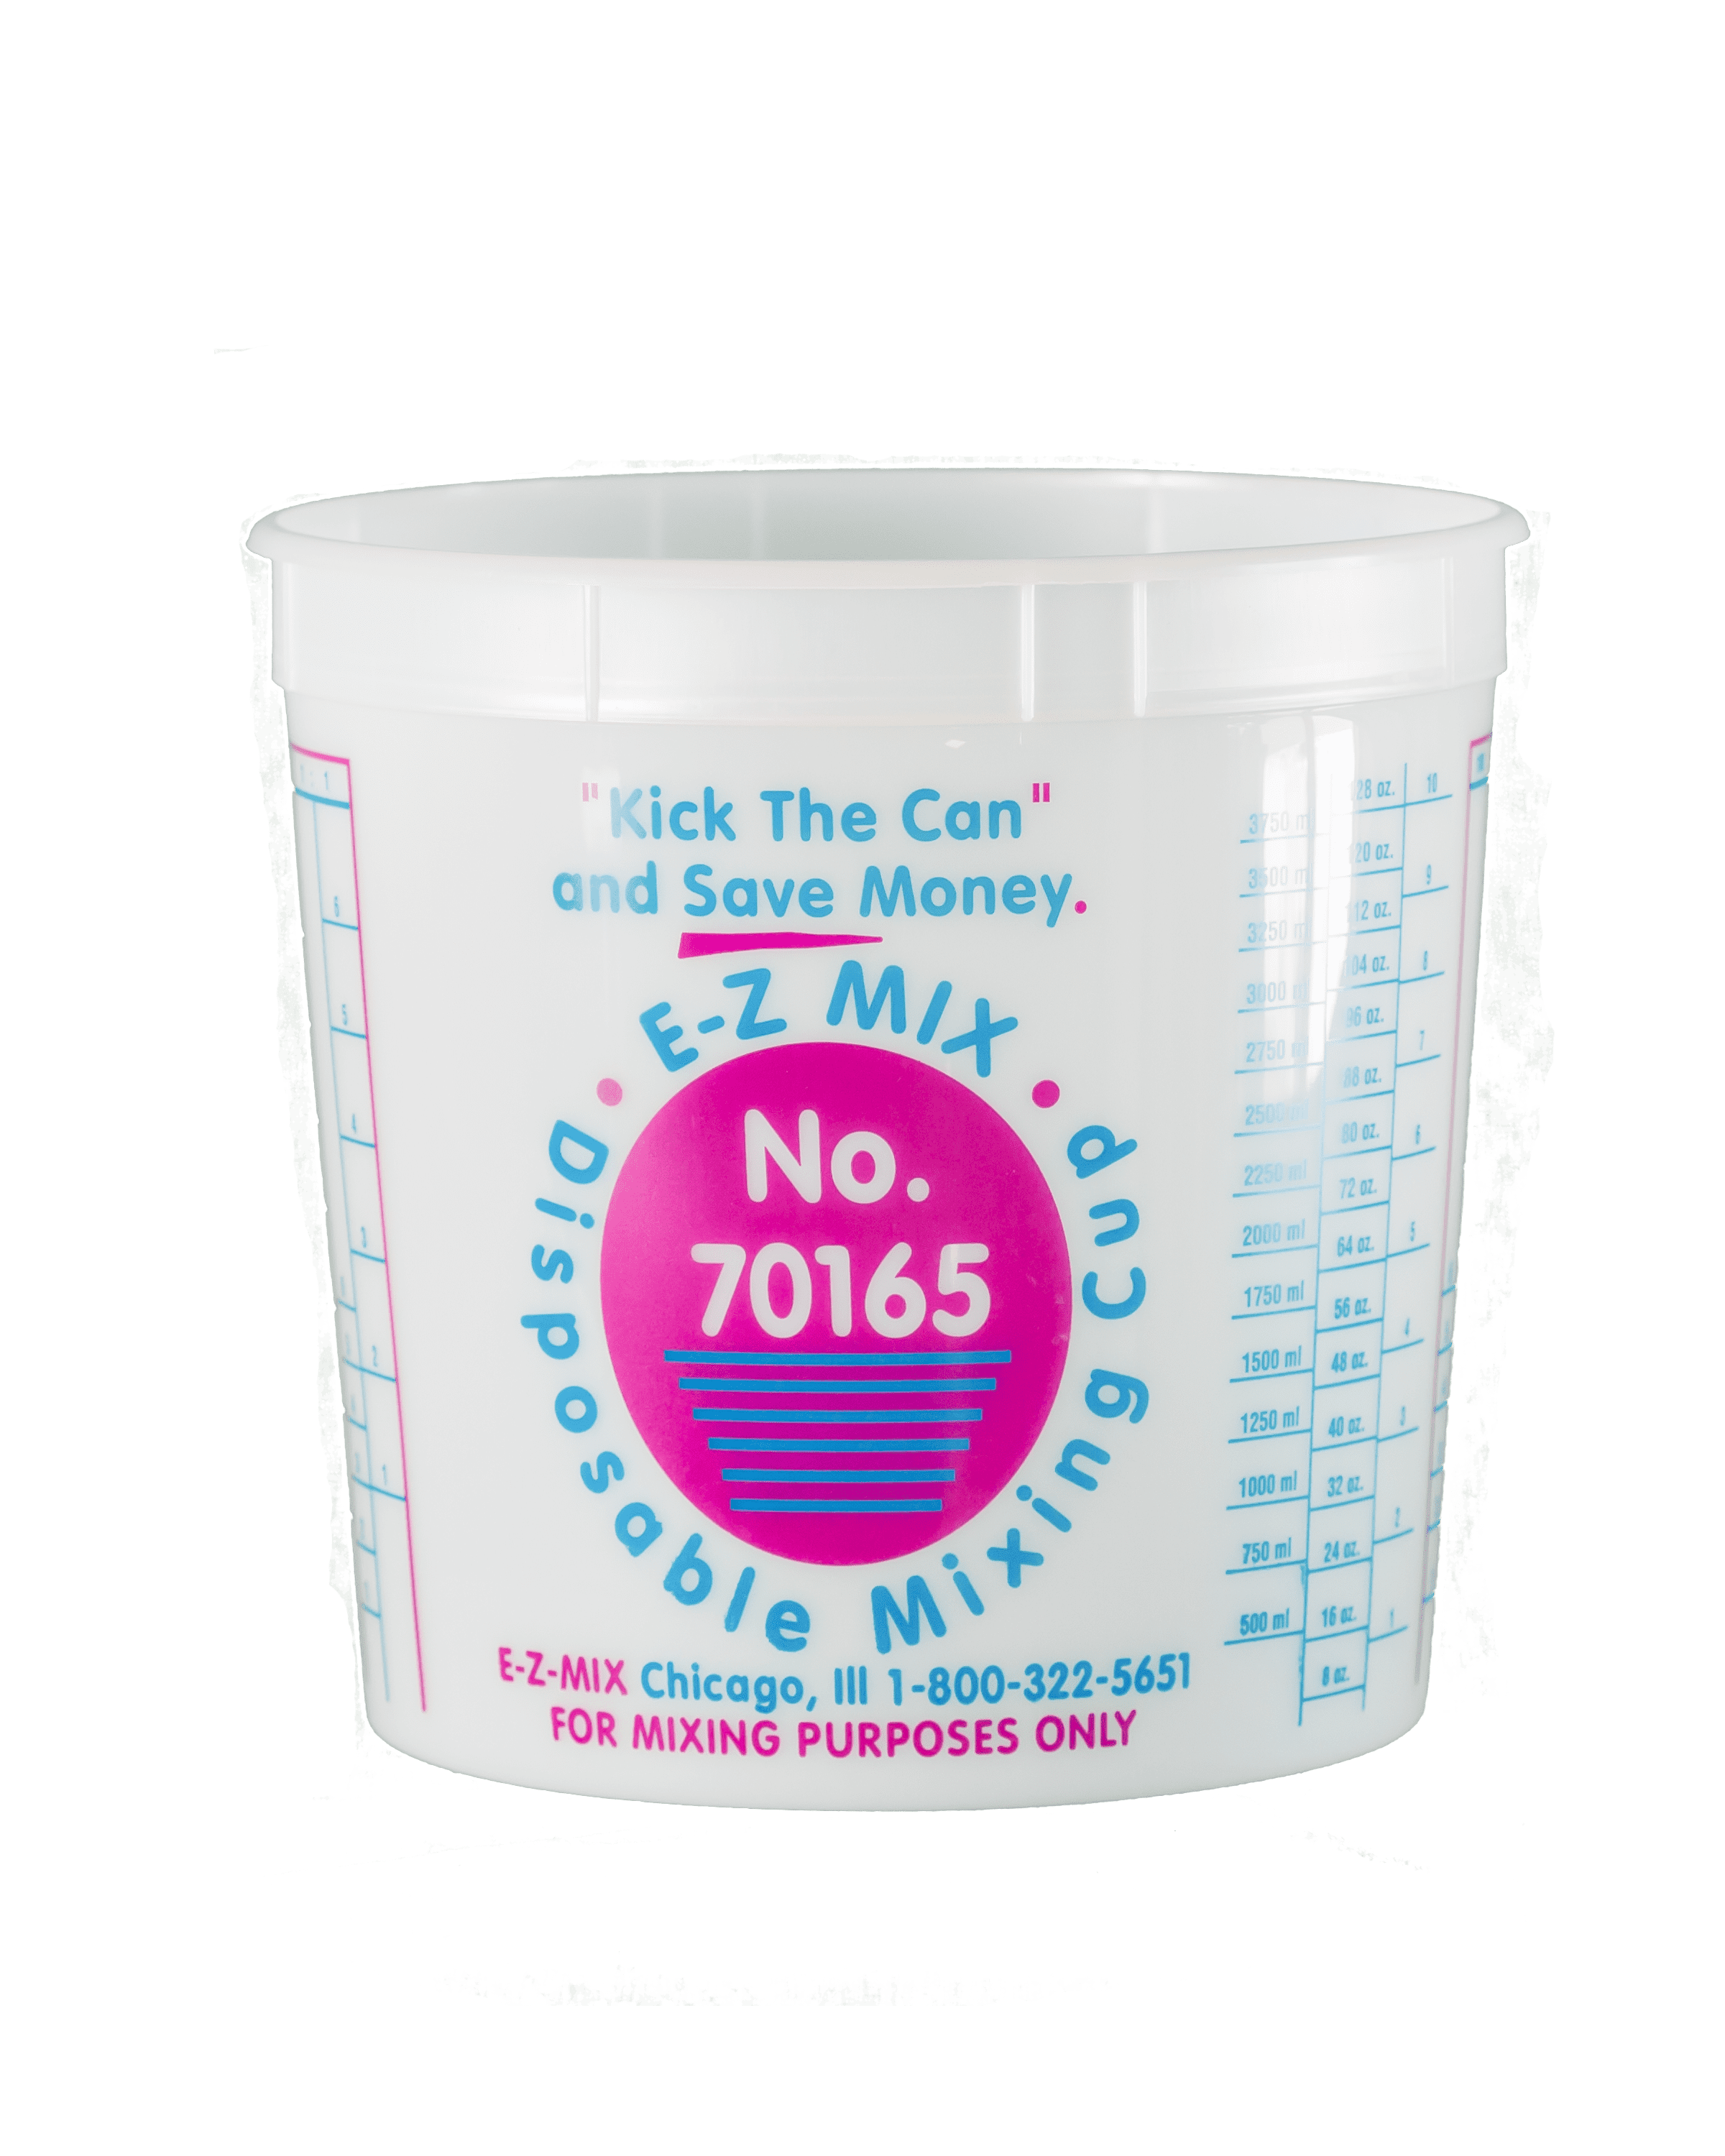 5354 And 05354 Quart Mixing Cup